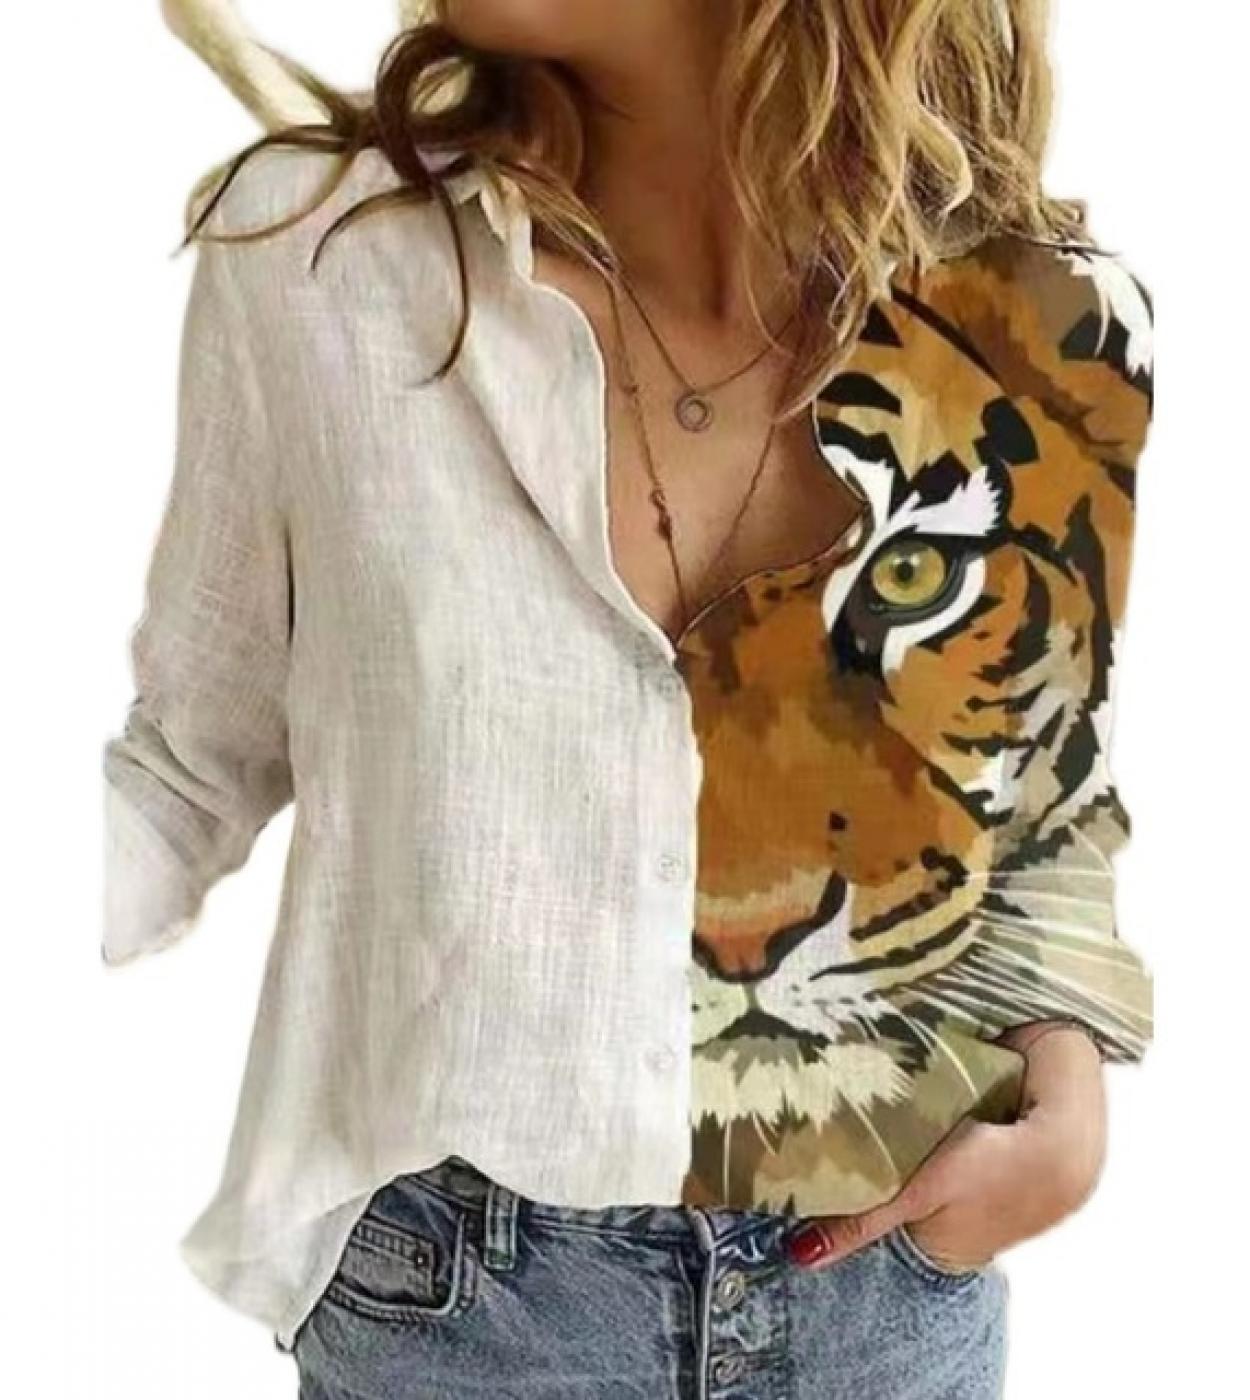 Vintage Animal Printed Blouse Casual Long Sleeve Floral Womens Shirts  Casual Cotton Linen Lady Tops Women Clothing Blus